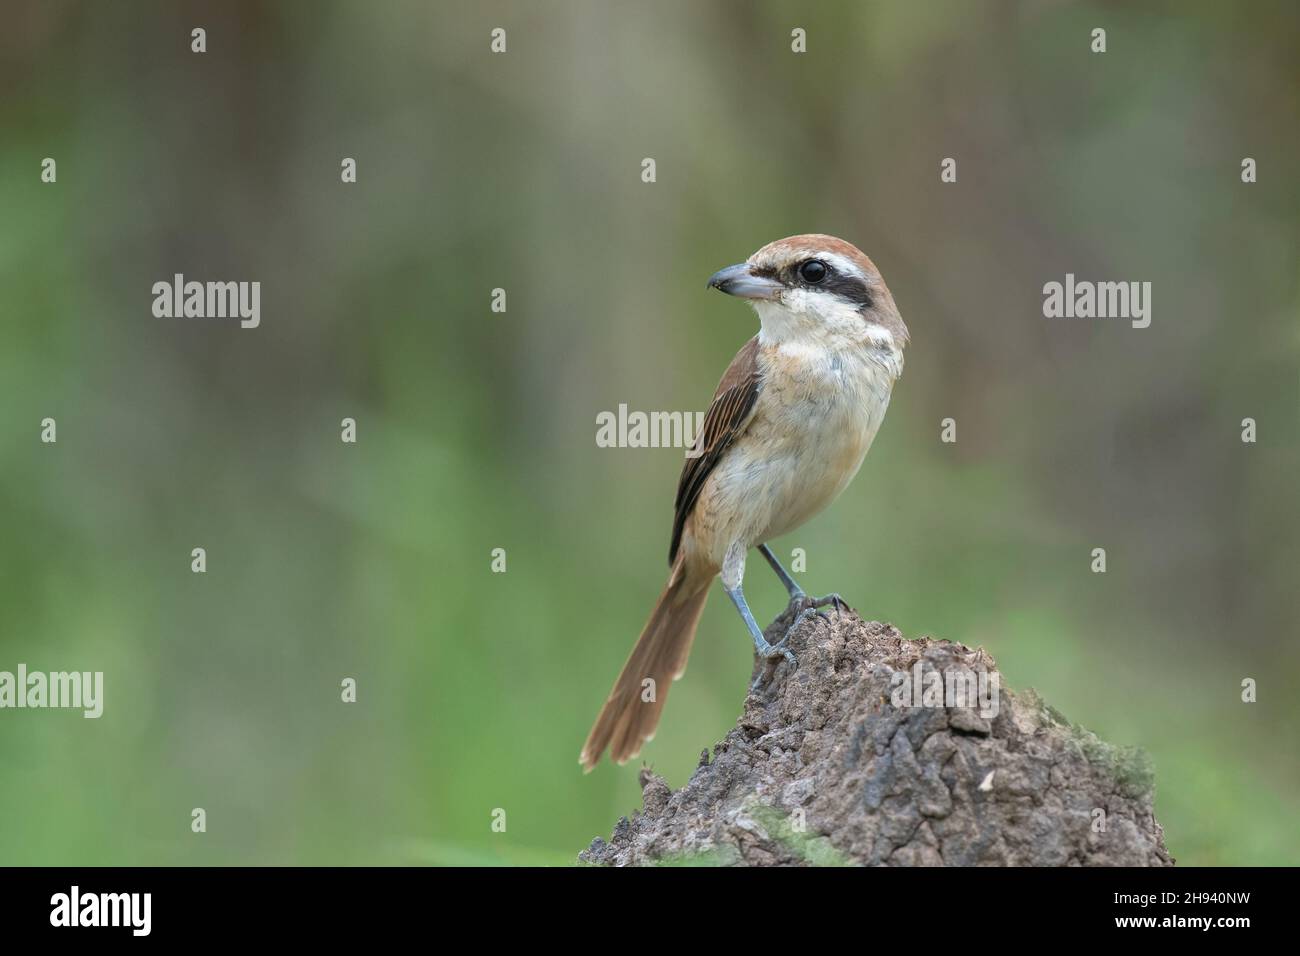 The brown shrike (Lanius cristatus) is a bird in the shrike family that is found mainly in Asia. Stock Photo